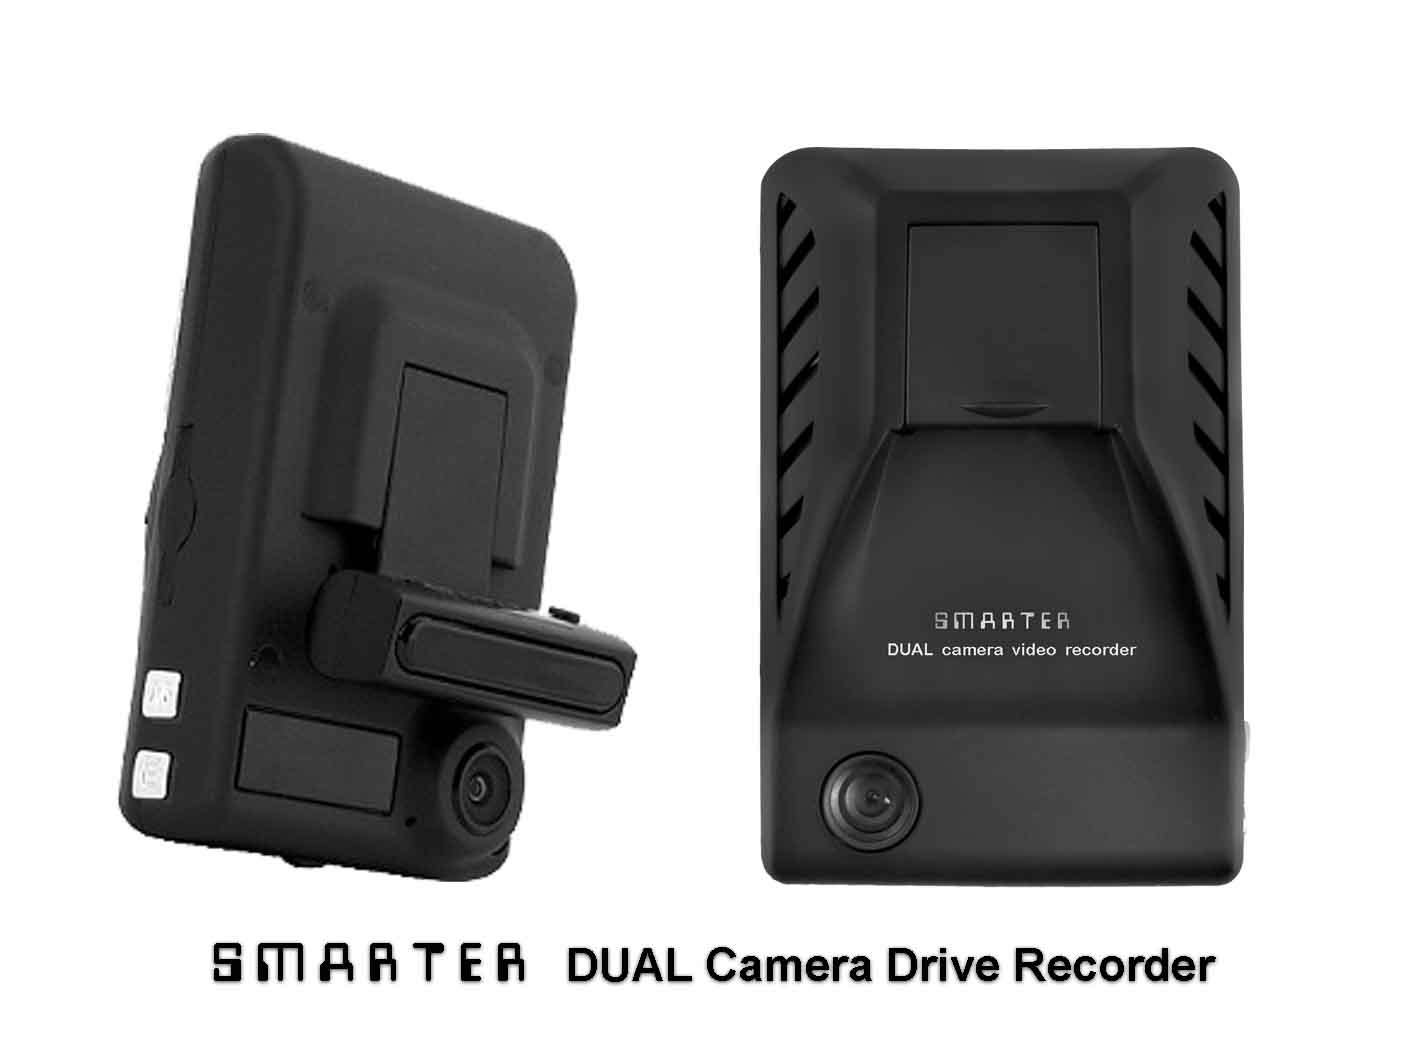 Keytroller Introduces Dual Video Drive Recorder with GPS